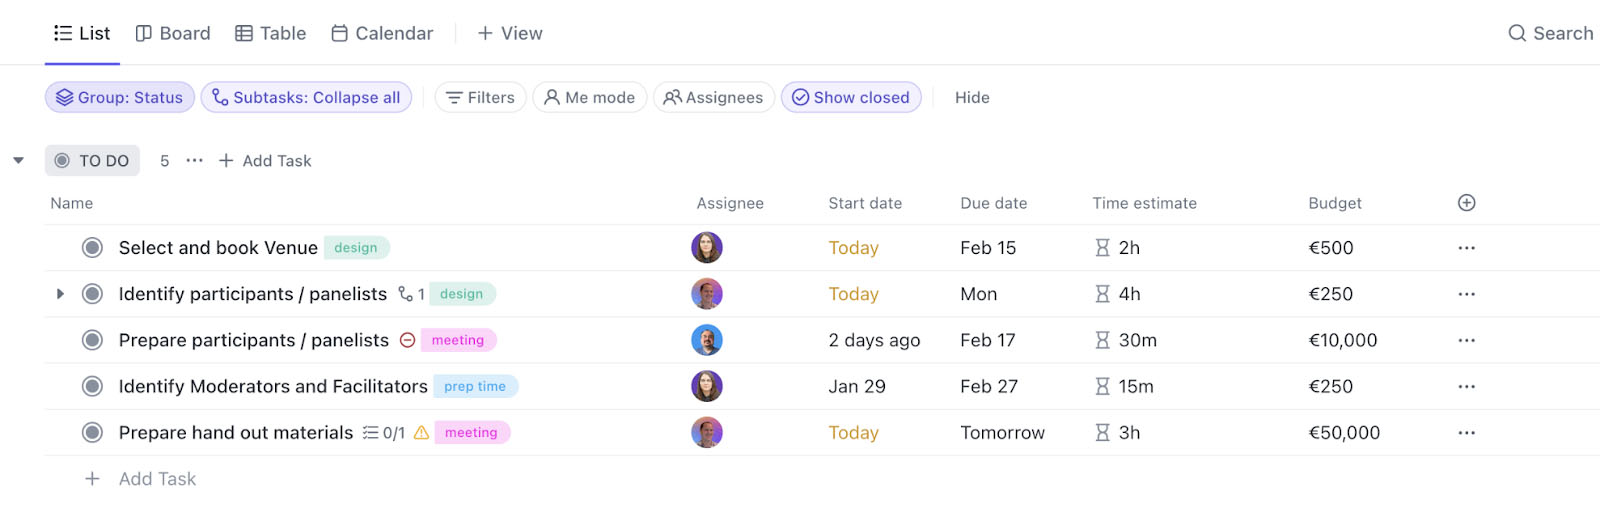 ClickUp list view with custom fields for start date, due date, time estimate, and budget.